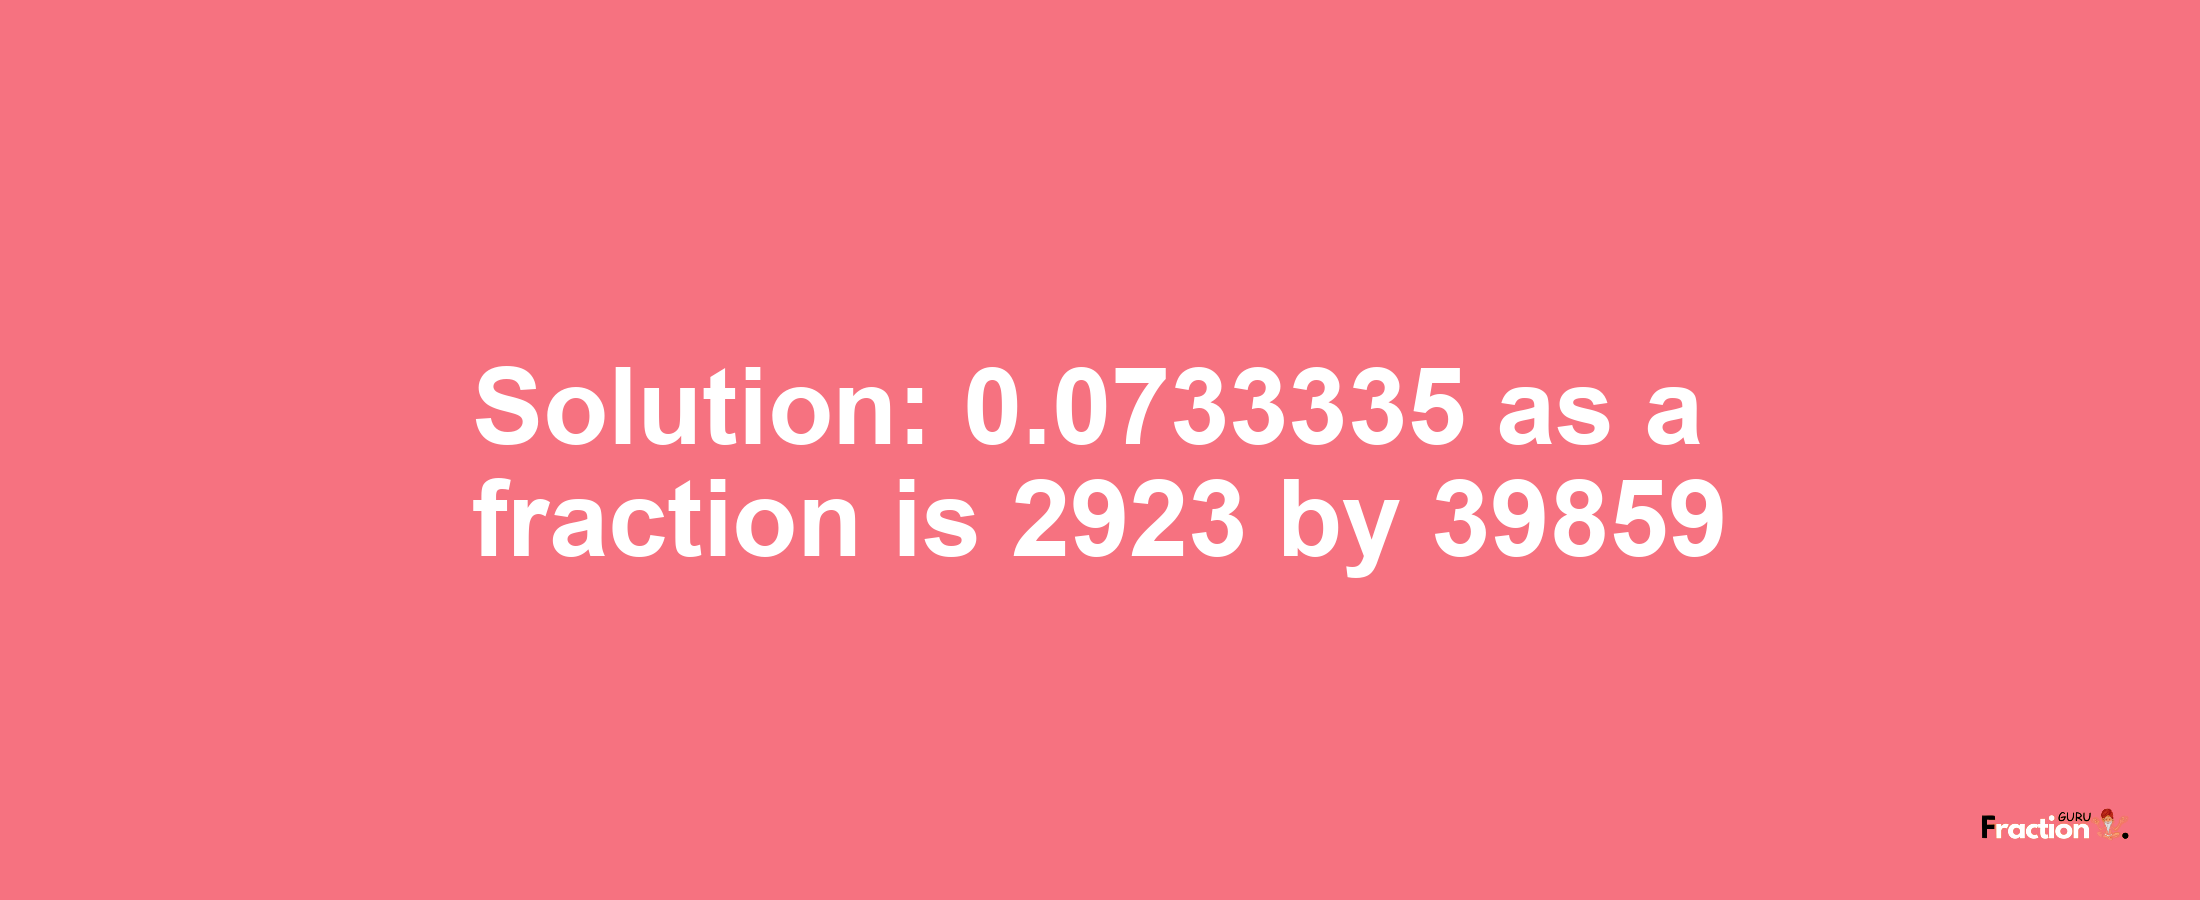 Solution:0.0733335 as a fraction is 2923/39859